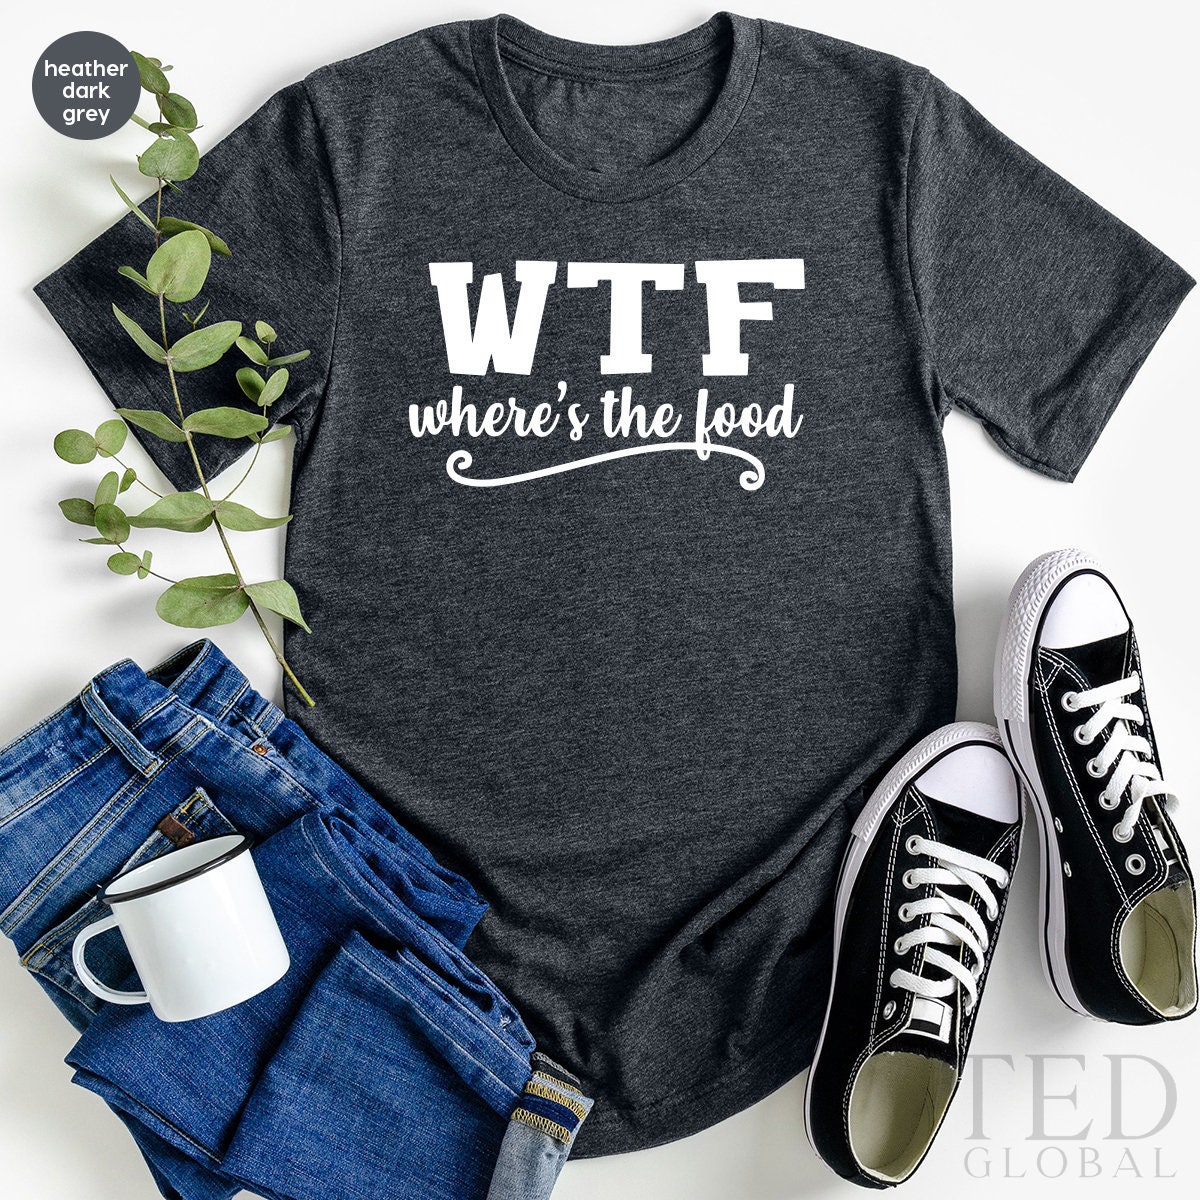 Funny WTF Foodie Shirt